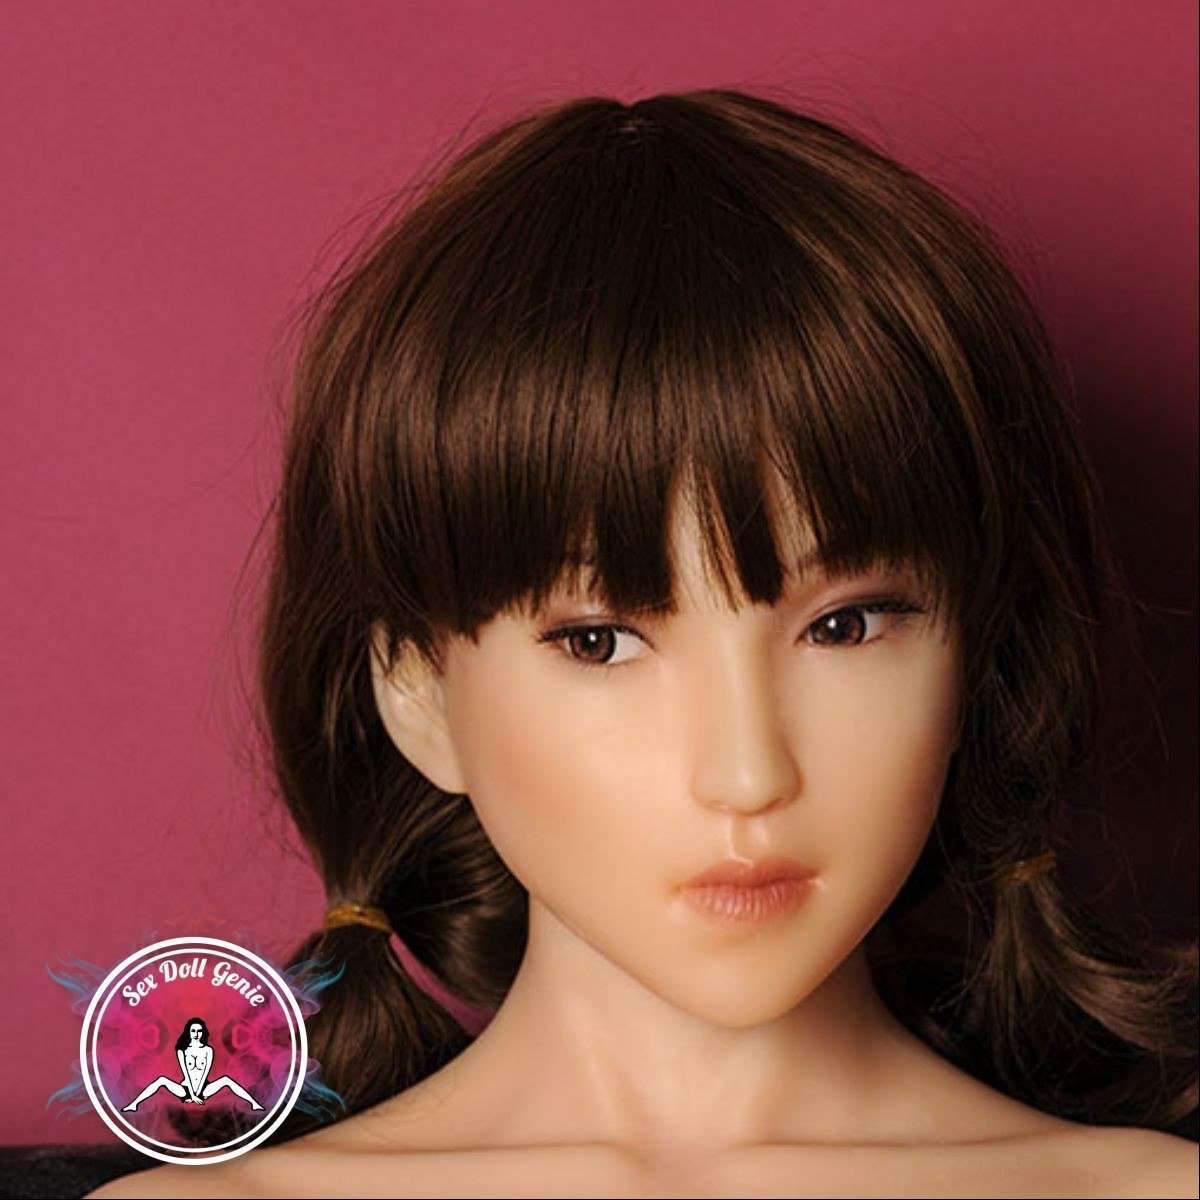 DS Doll – 163 – Emily Head – Typ 1 D Cup Silikonpuppe-17